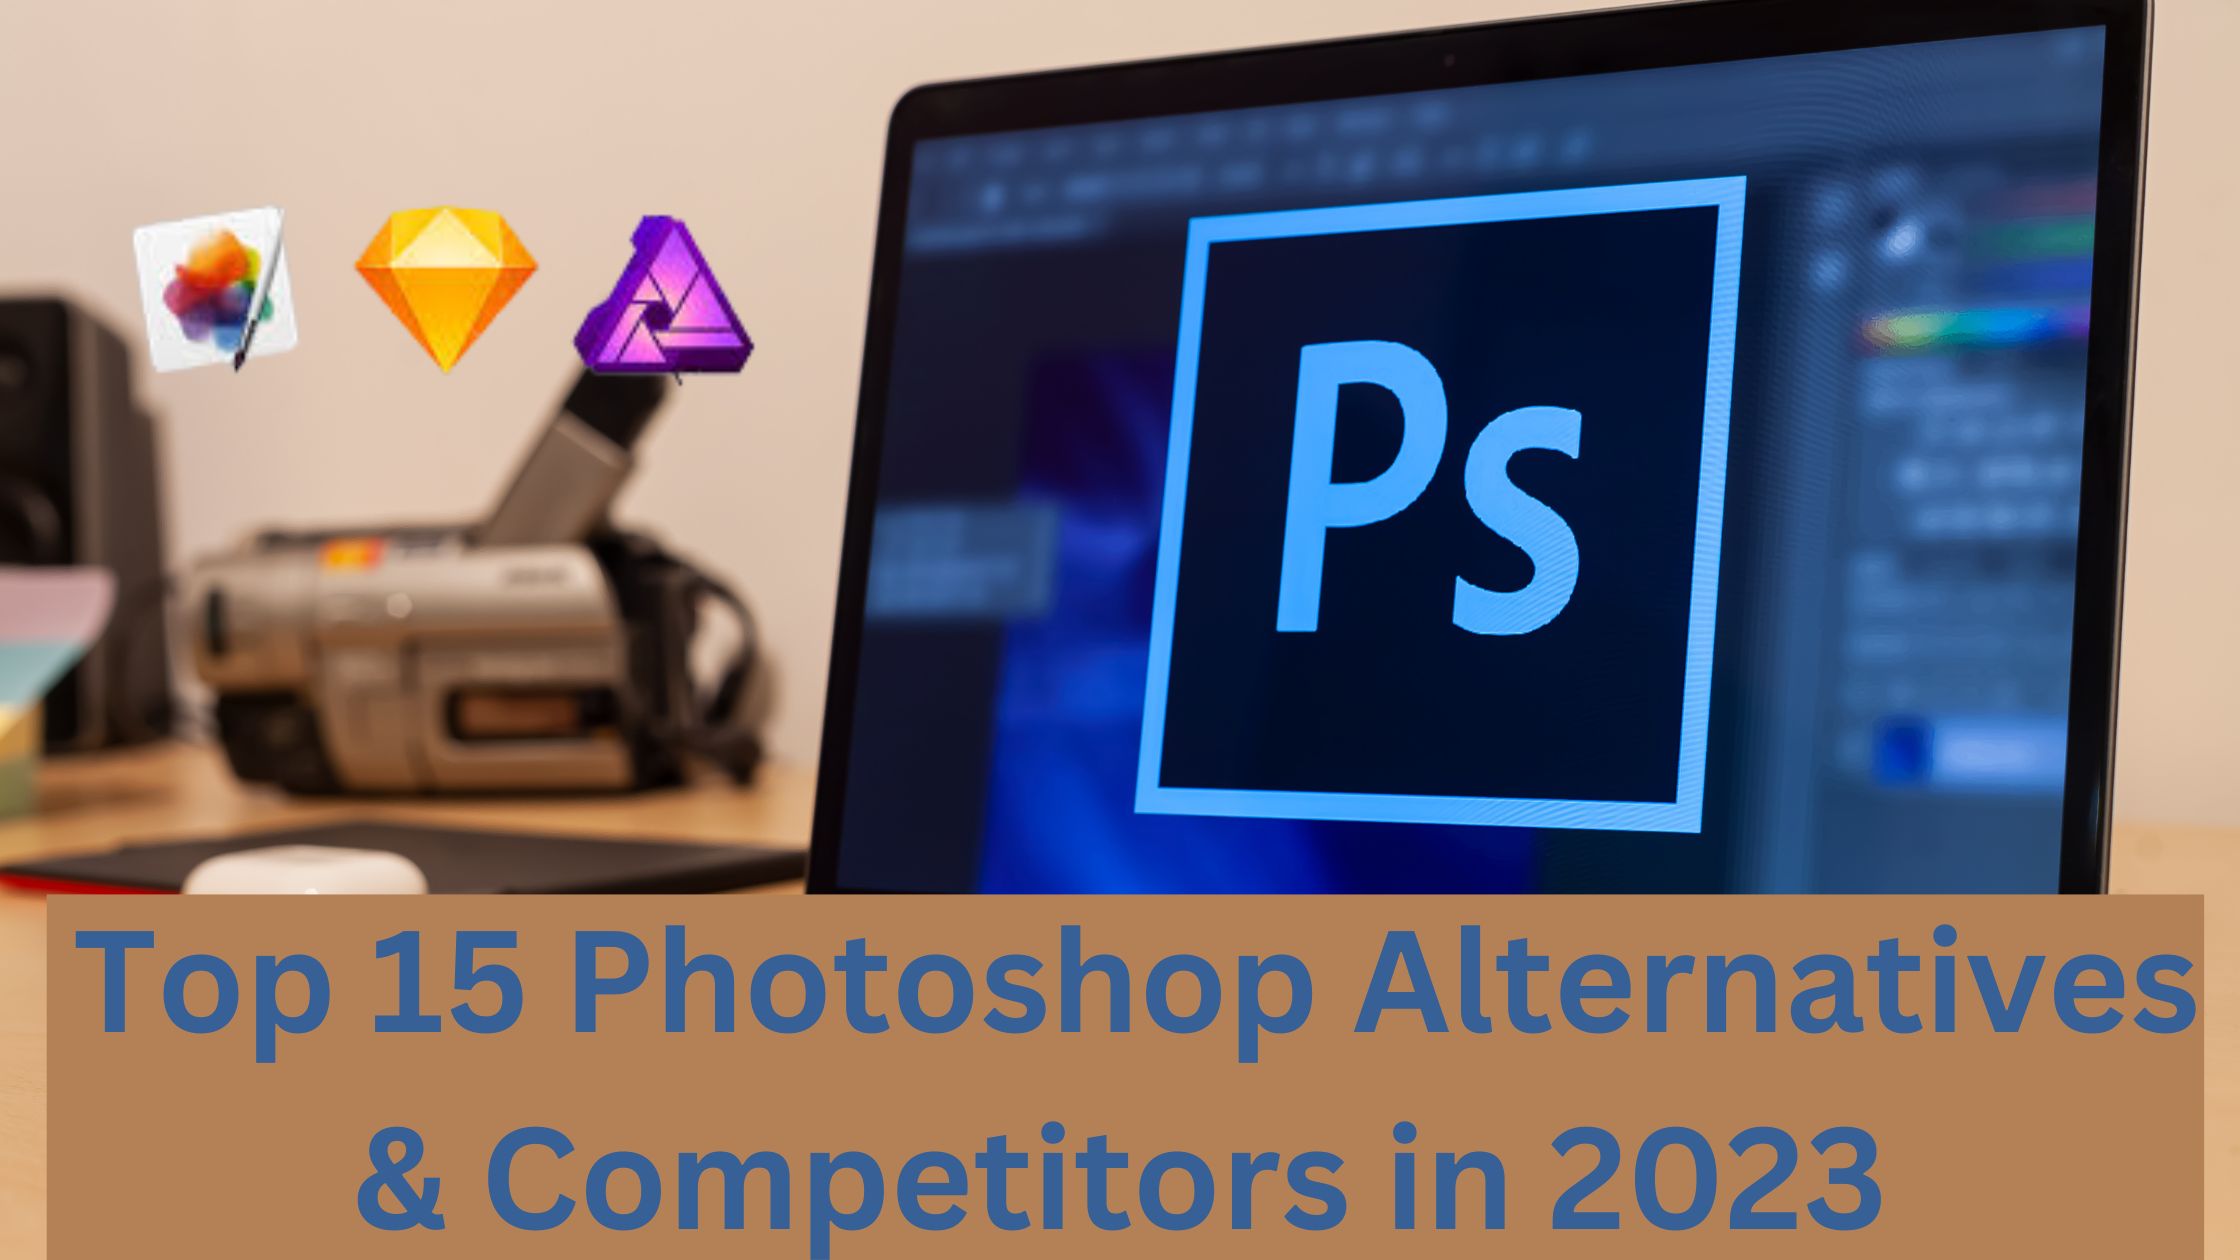 Top 15 Photoshop Alternatives & Competitors in 2023